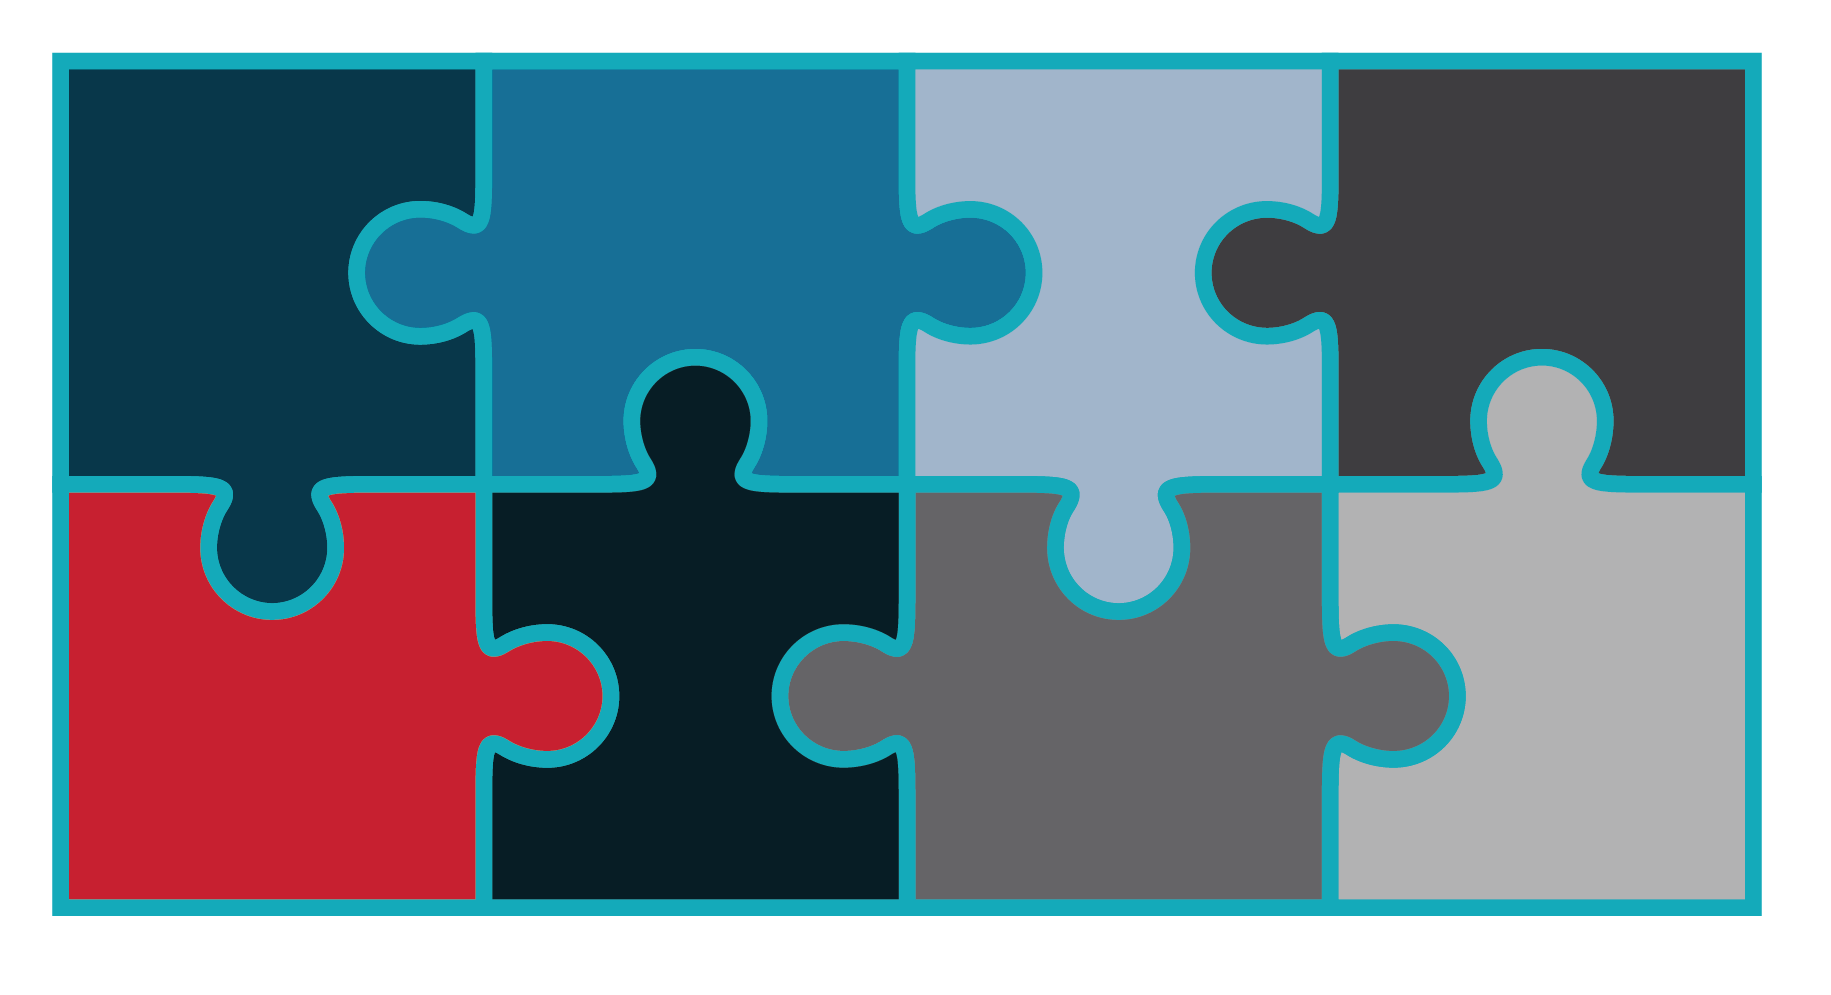 Image of puzzle pieces